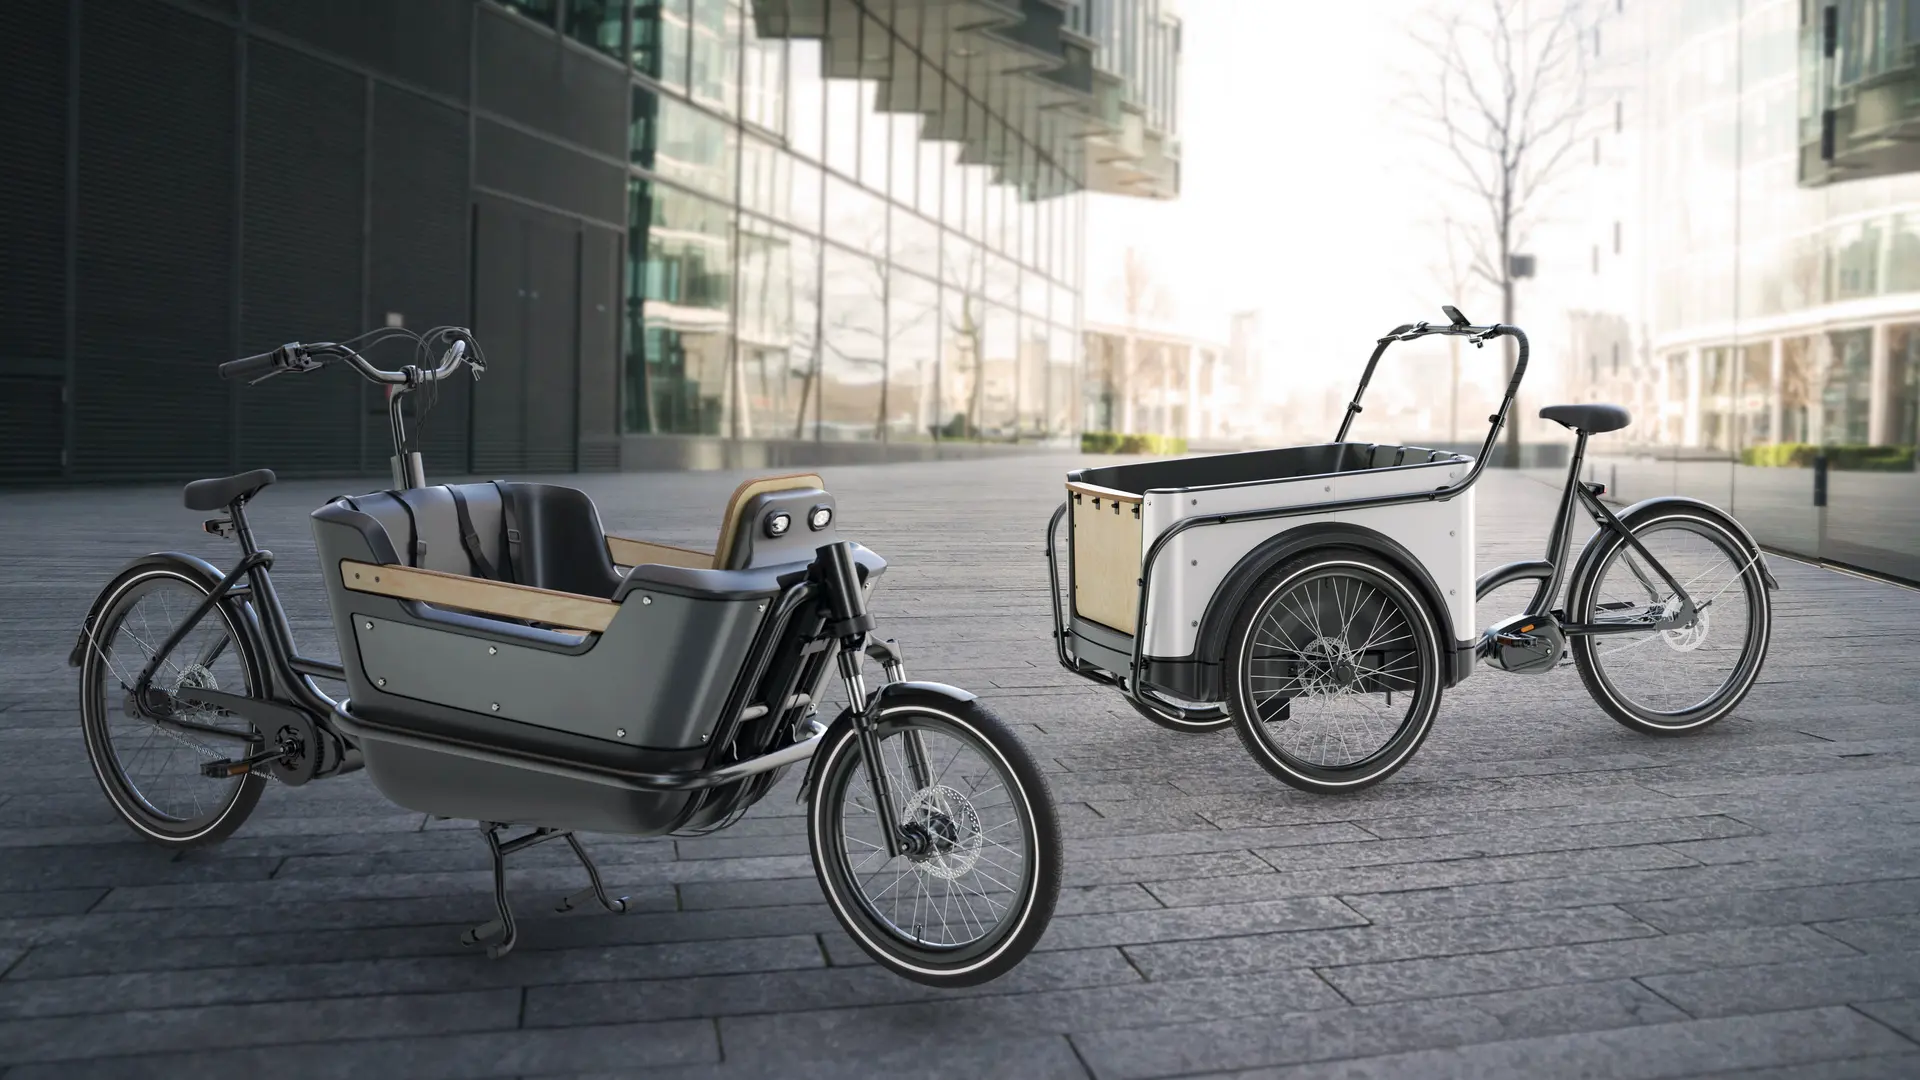 Our latest new Royal family cargo bikes have arrived!